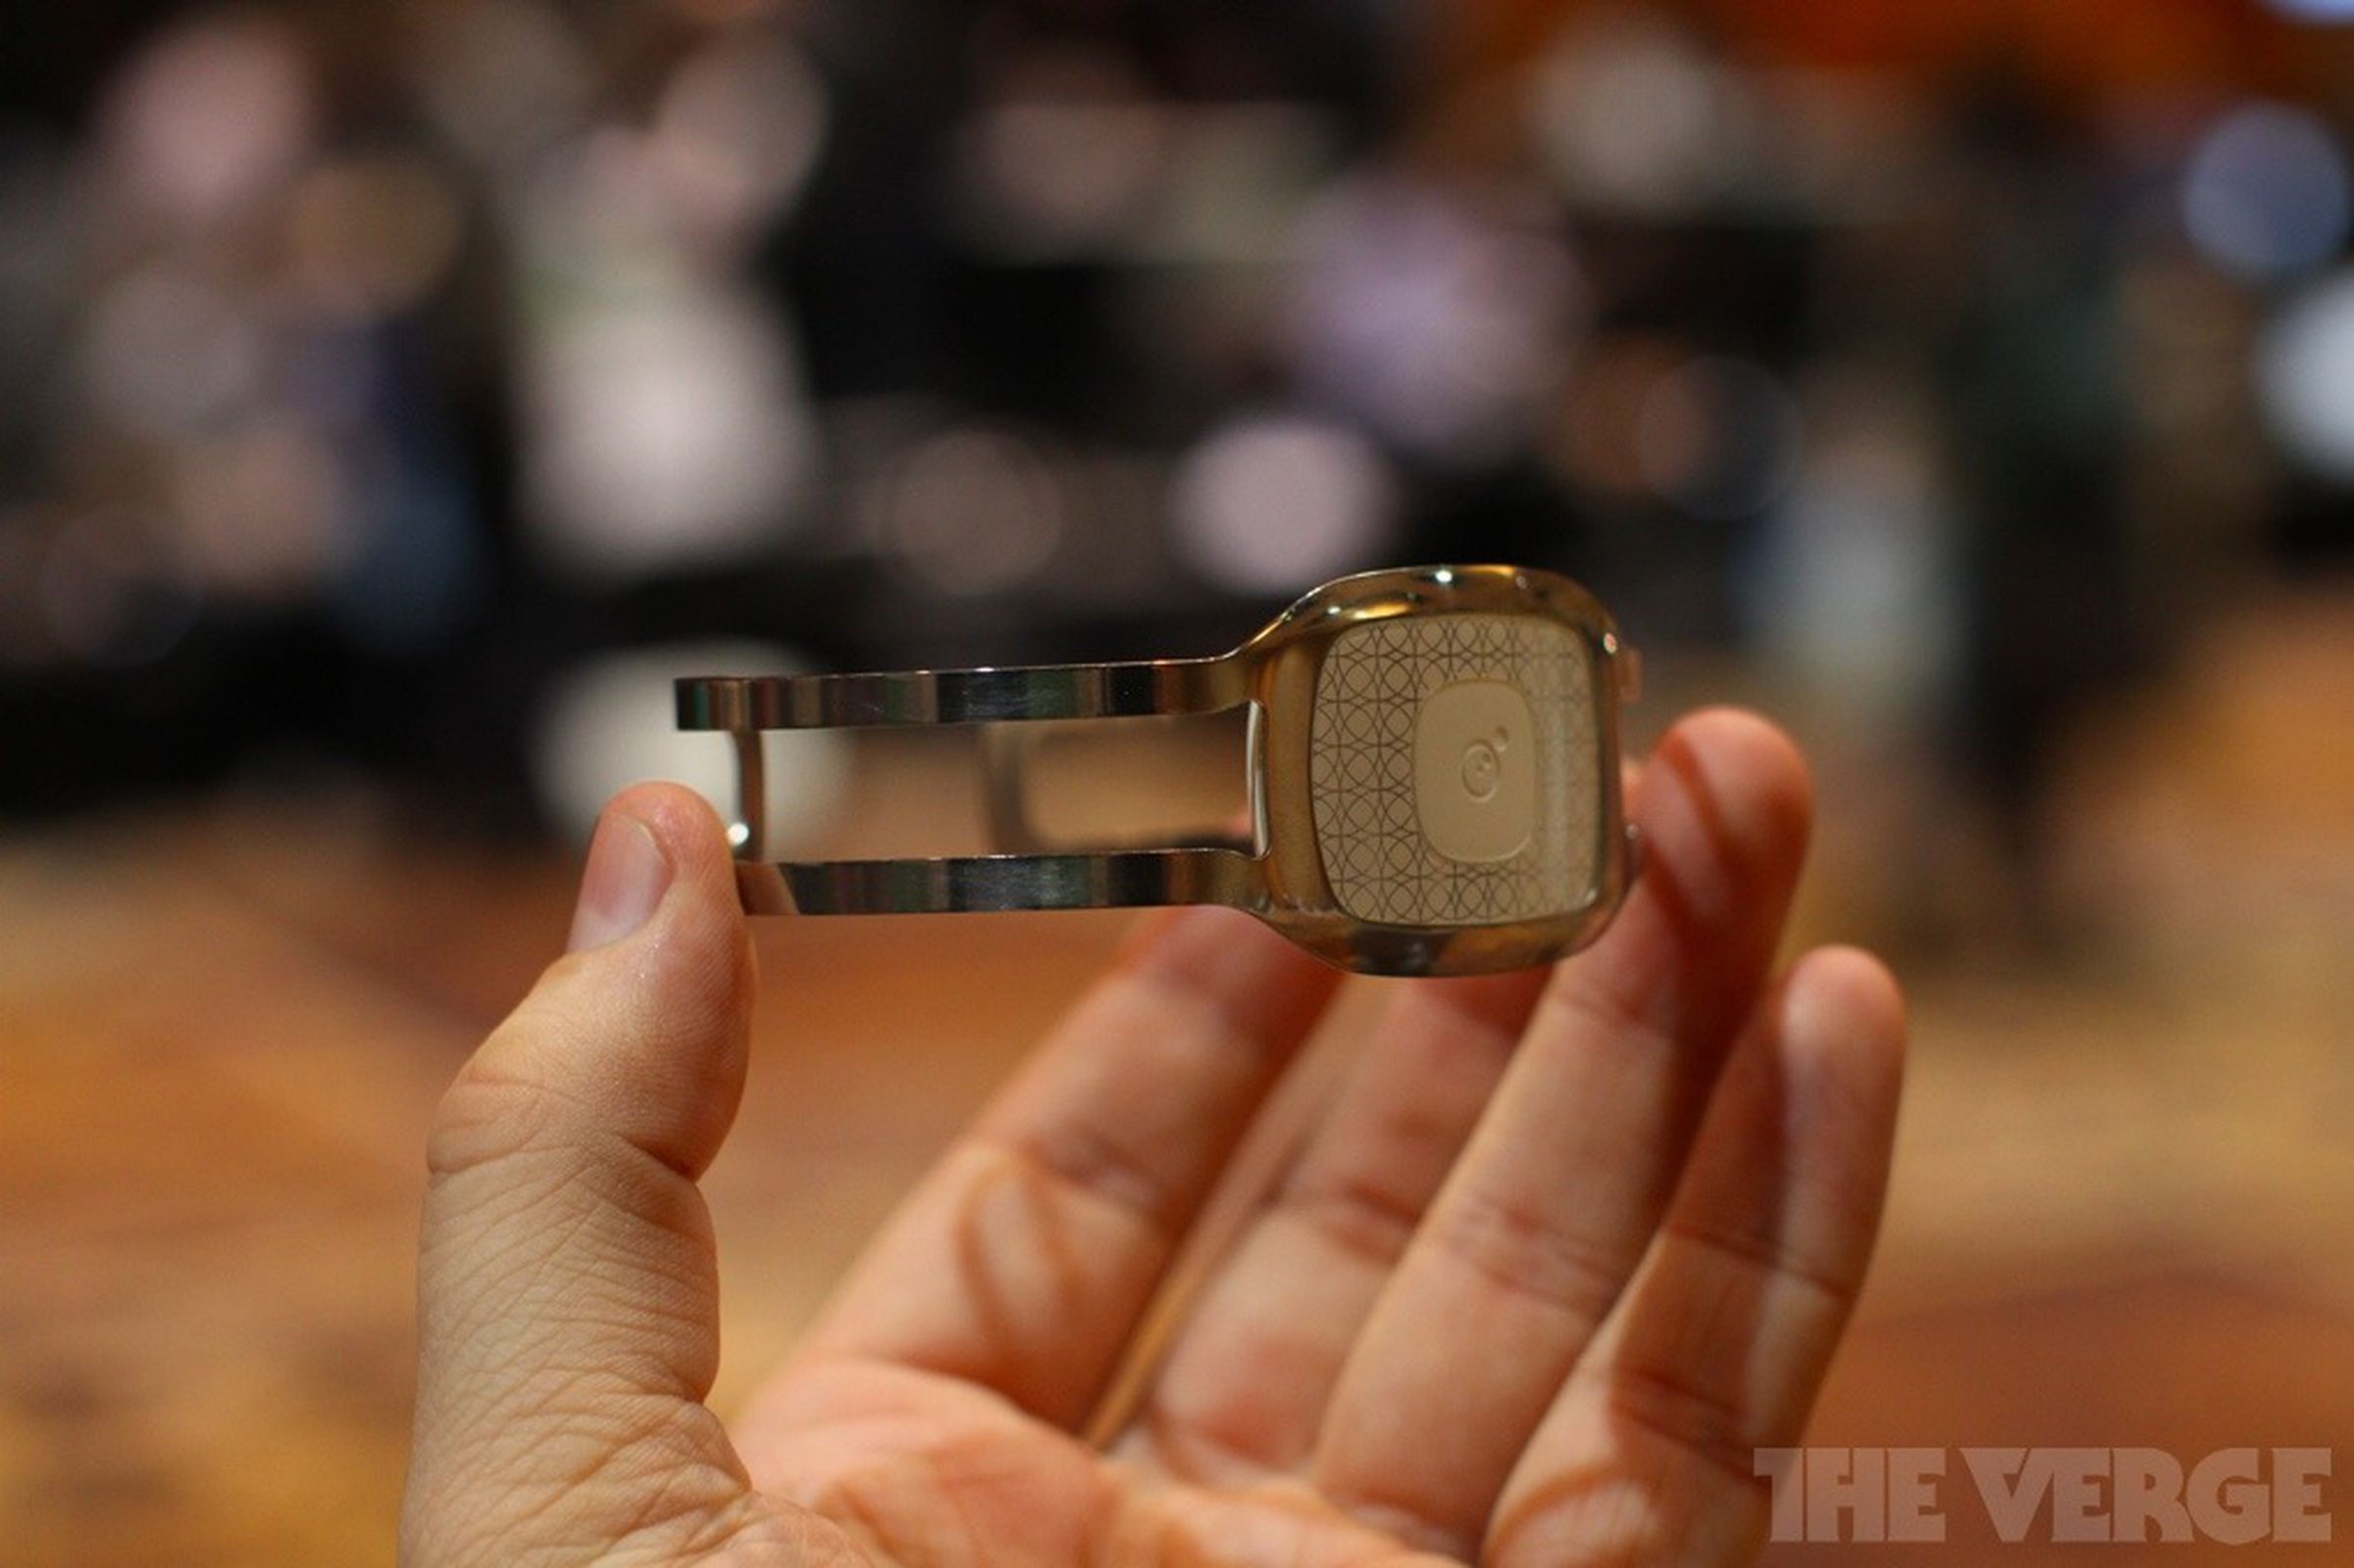 BodyMedia Core 2 personal fitness and health monitor hands-on photos